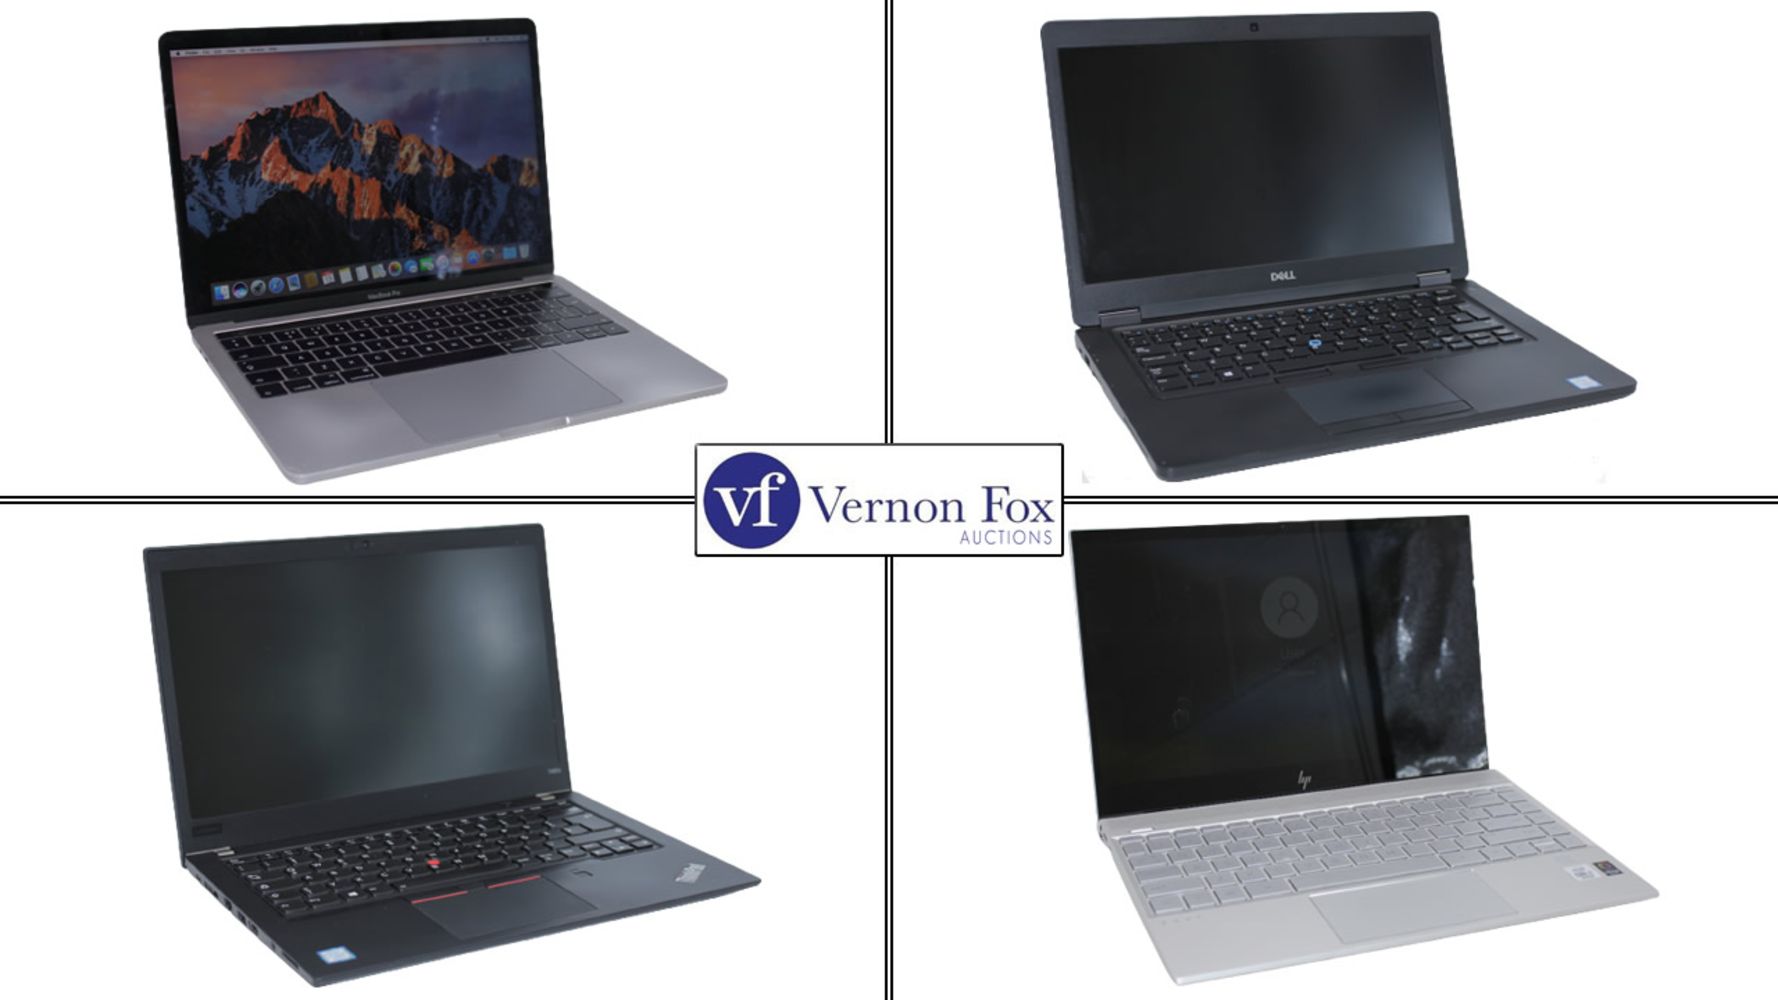 The Laptop Sale. New and Pre-owned Laptops and MacBooks, with FREE UK DELIVERY!